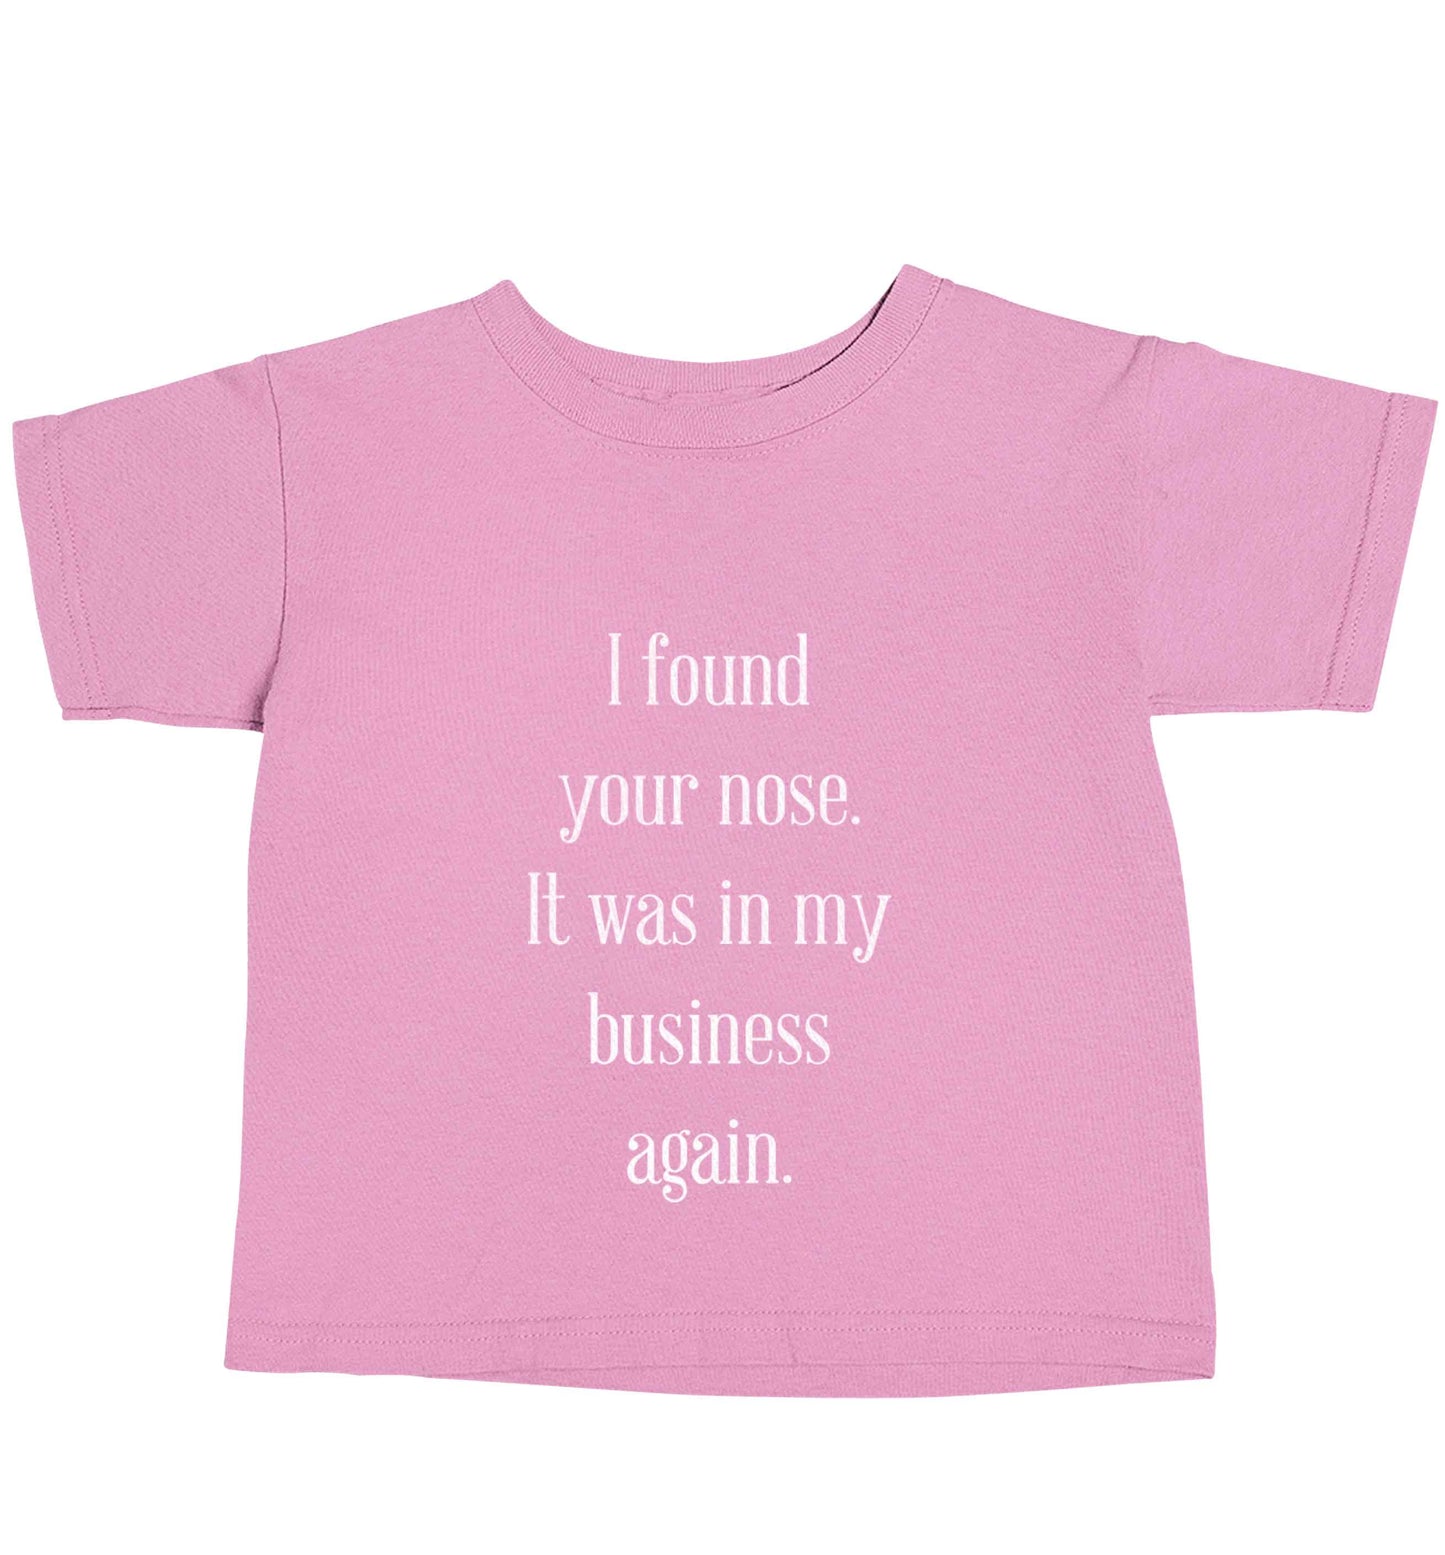 I found your nose it was in my business again light pink baby toddler Tshirt 2 Years